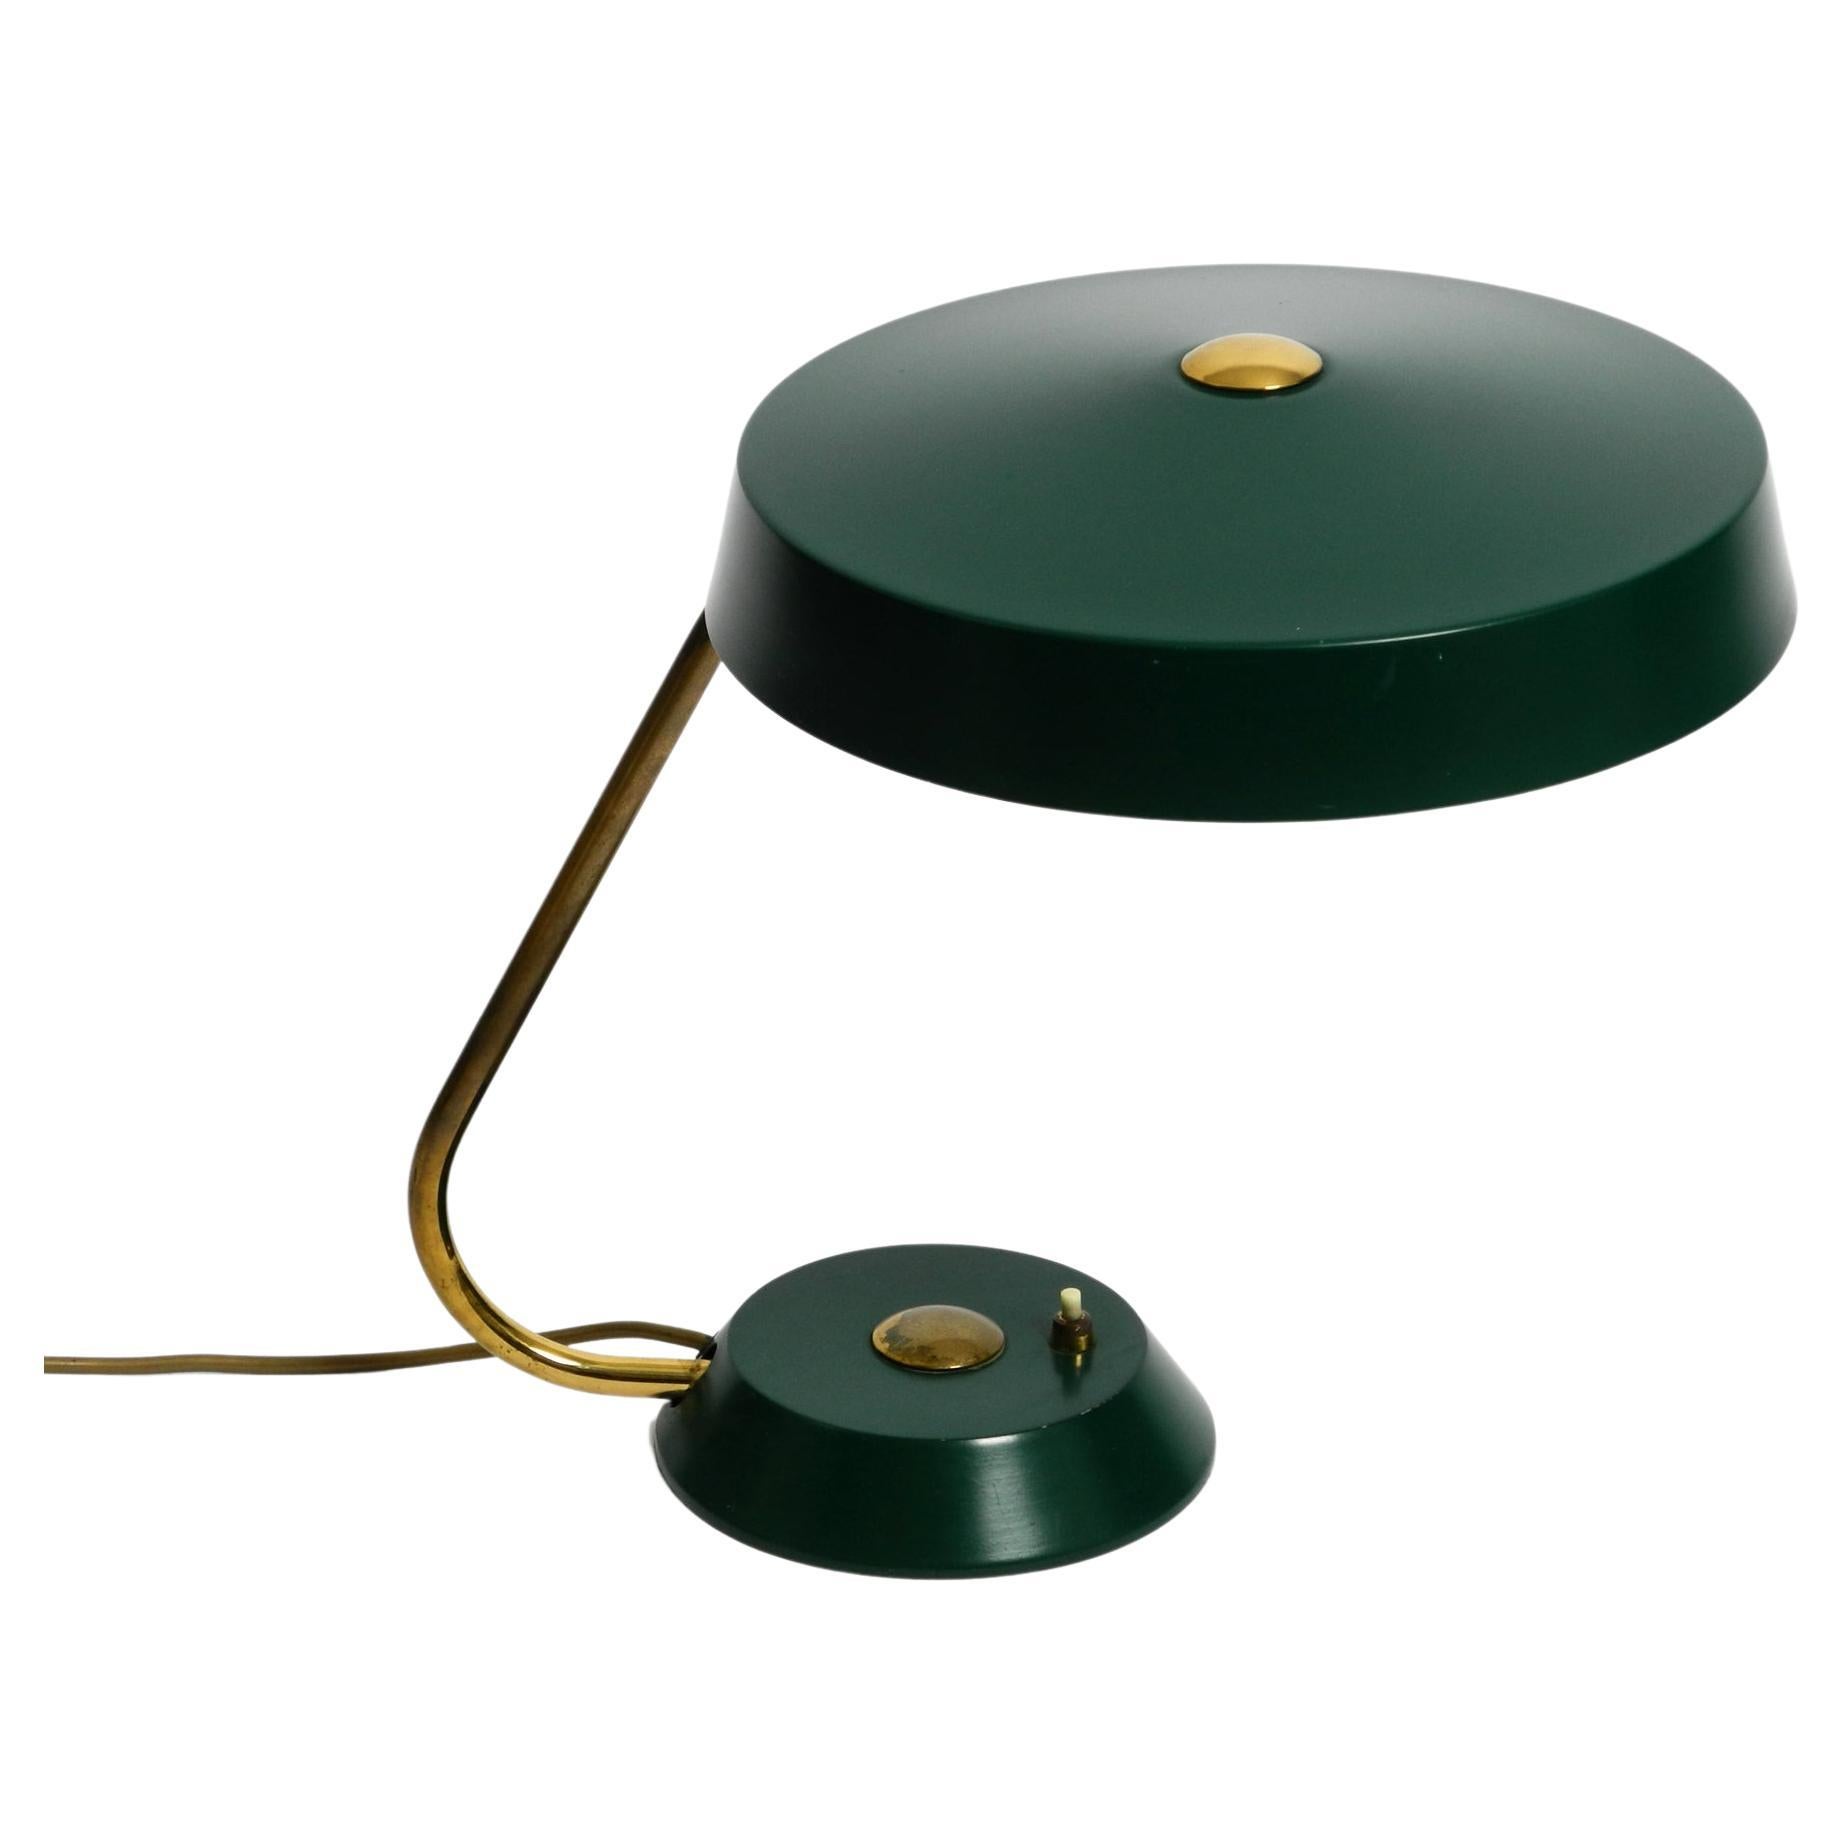 Large heavy Mid Century metal table lamp in British Green in dreamlike condition